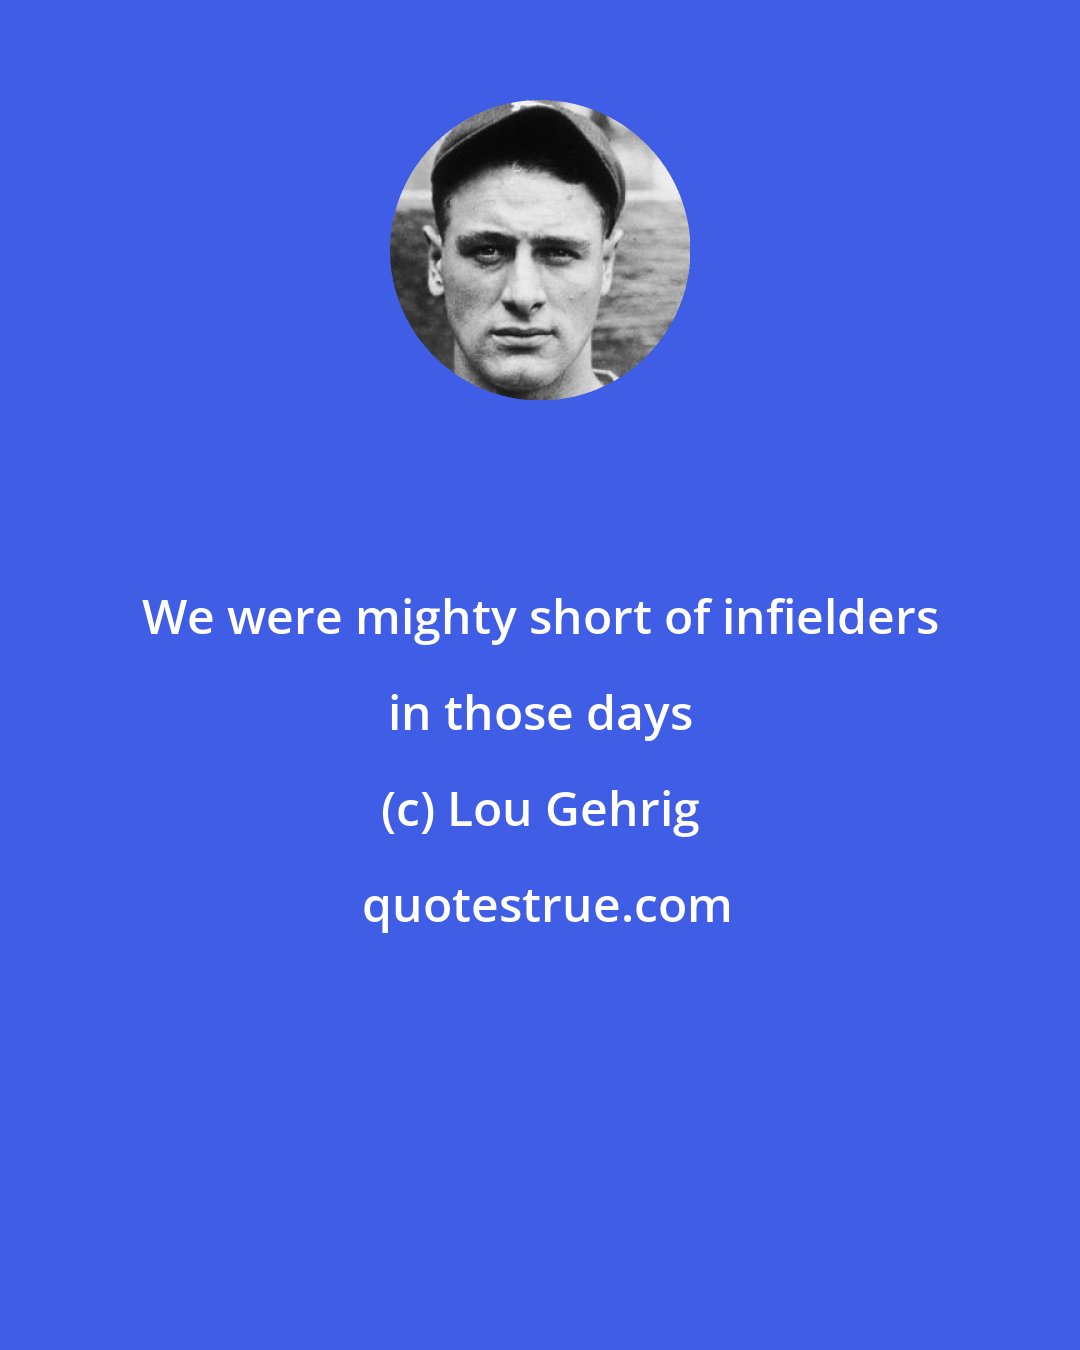 Lou Gehrig: We were mighty short of infielders in those days